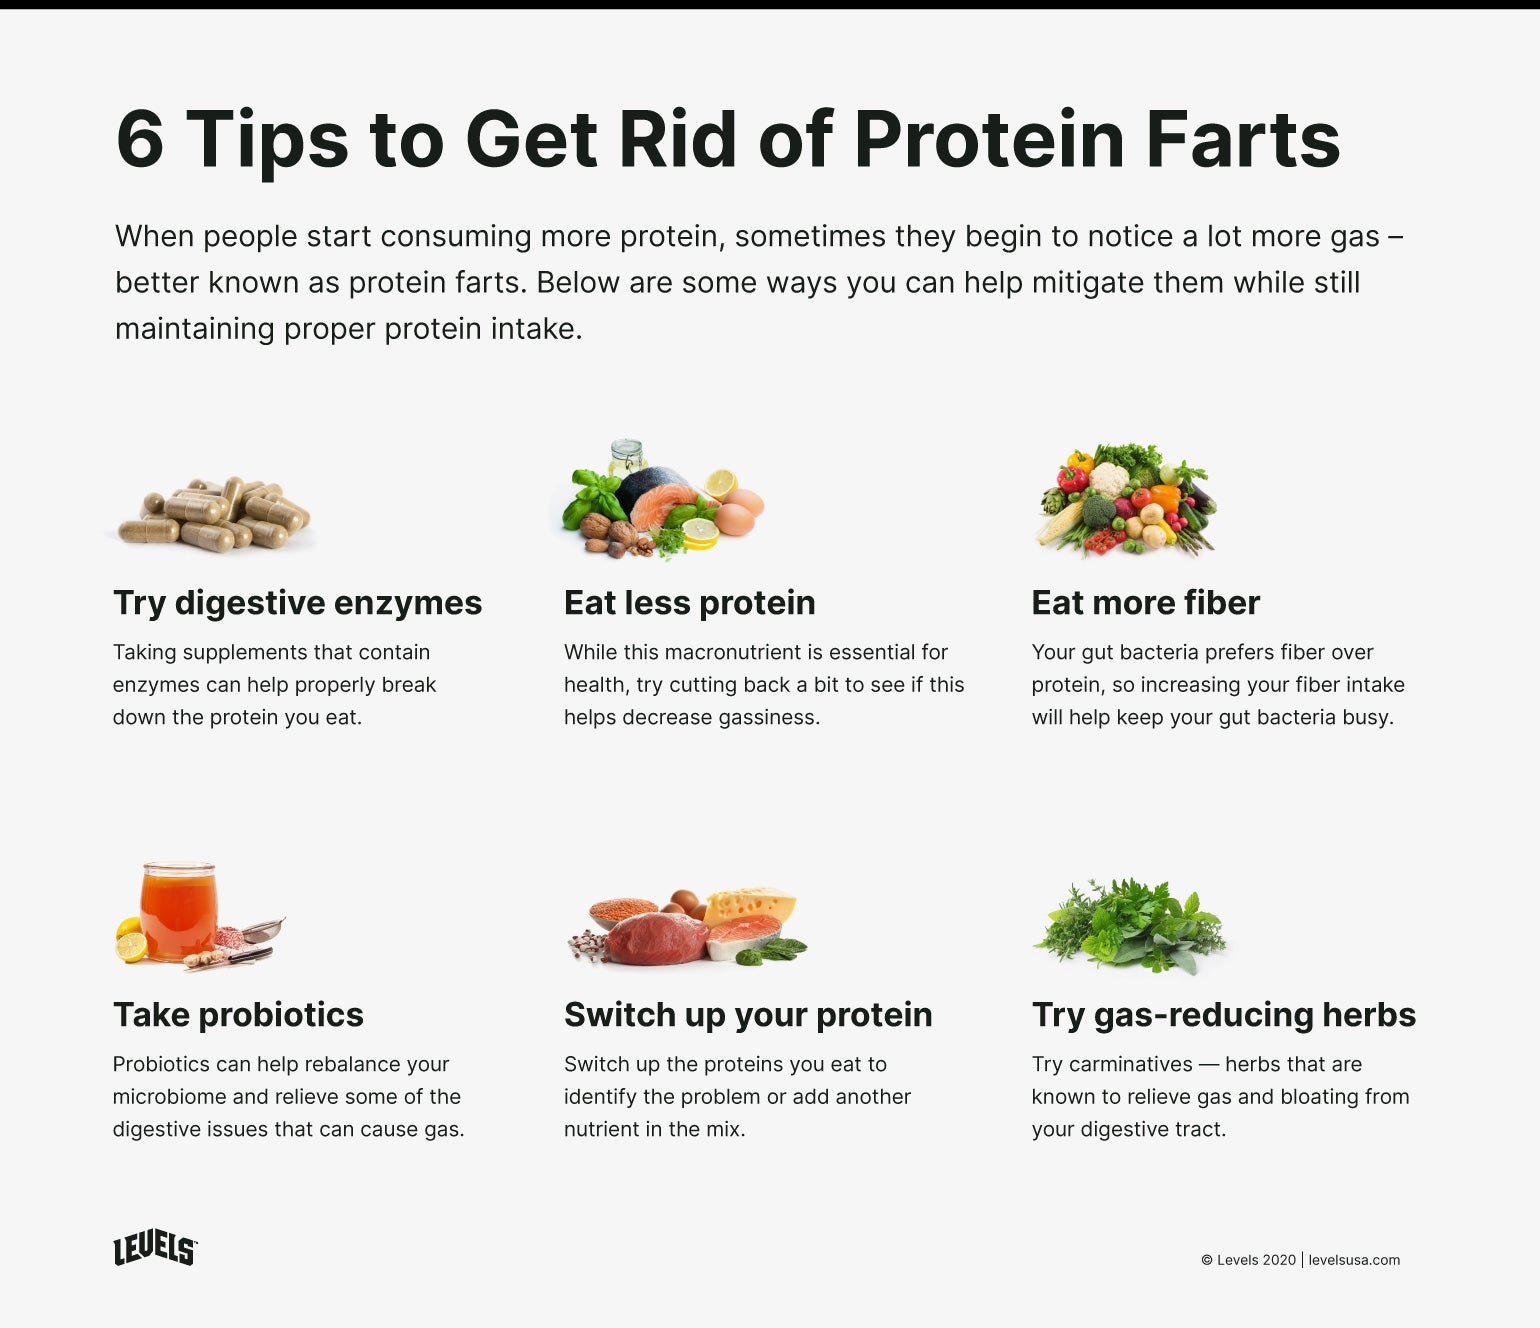 How to Get Rid of Protein Farts - Infographic